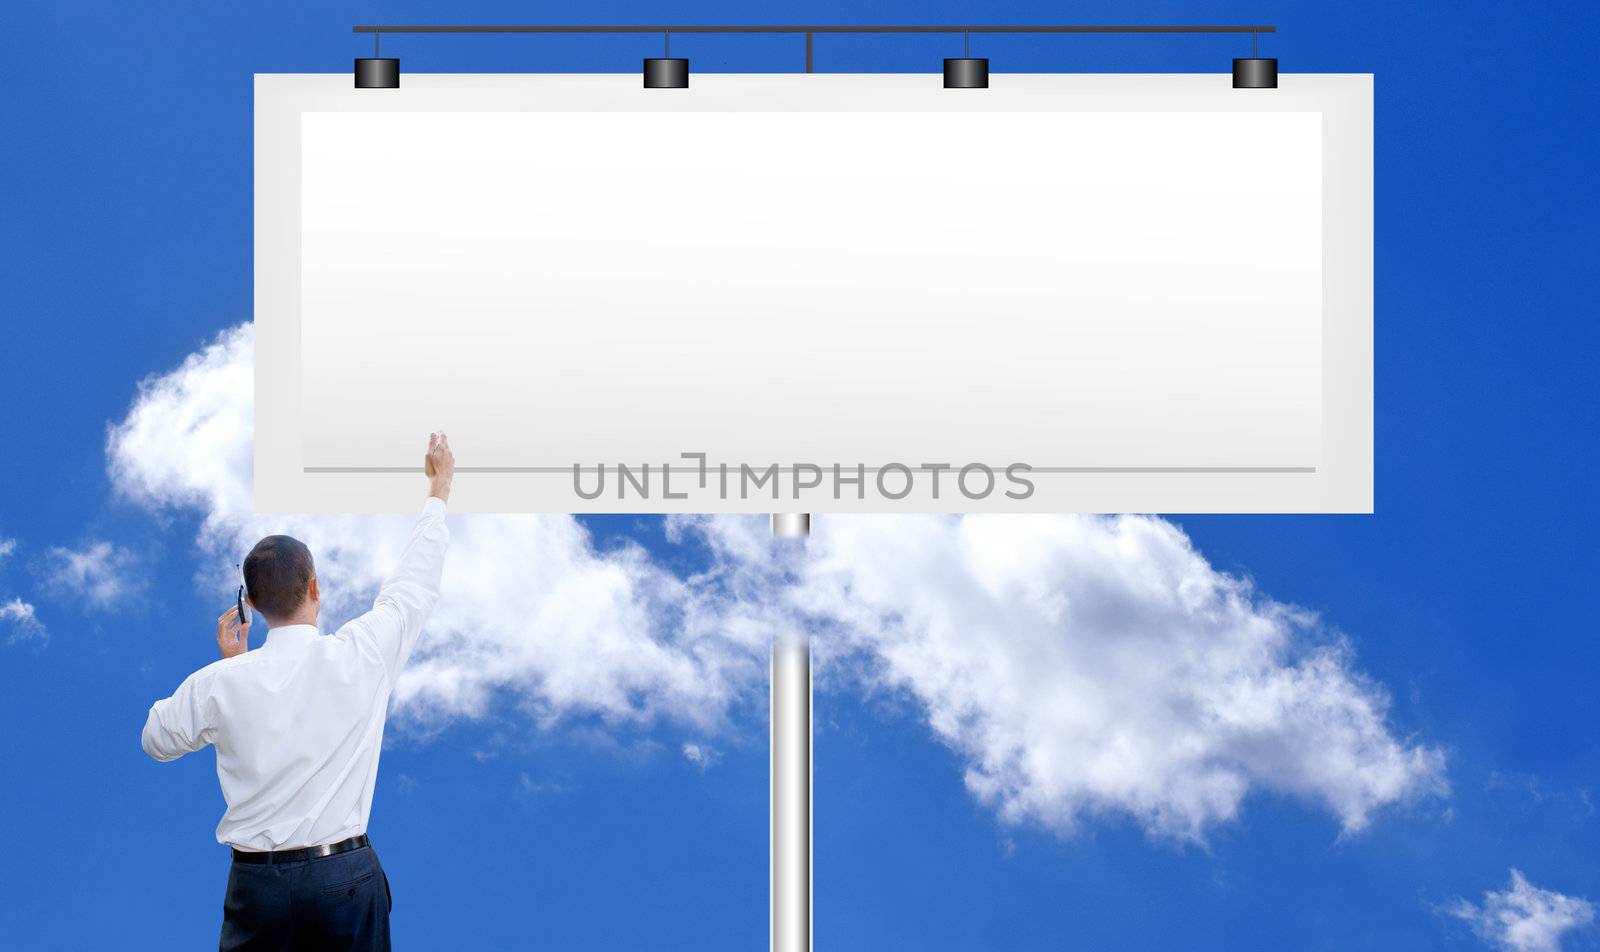 The successful businessman against a publicity board and the bright blue cloudy sky